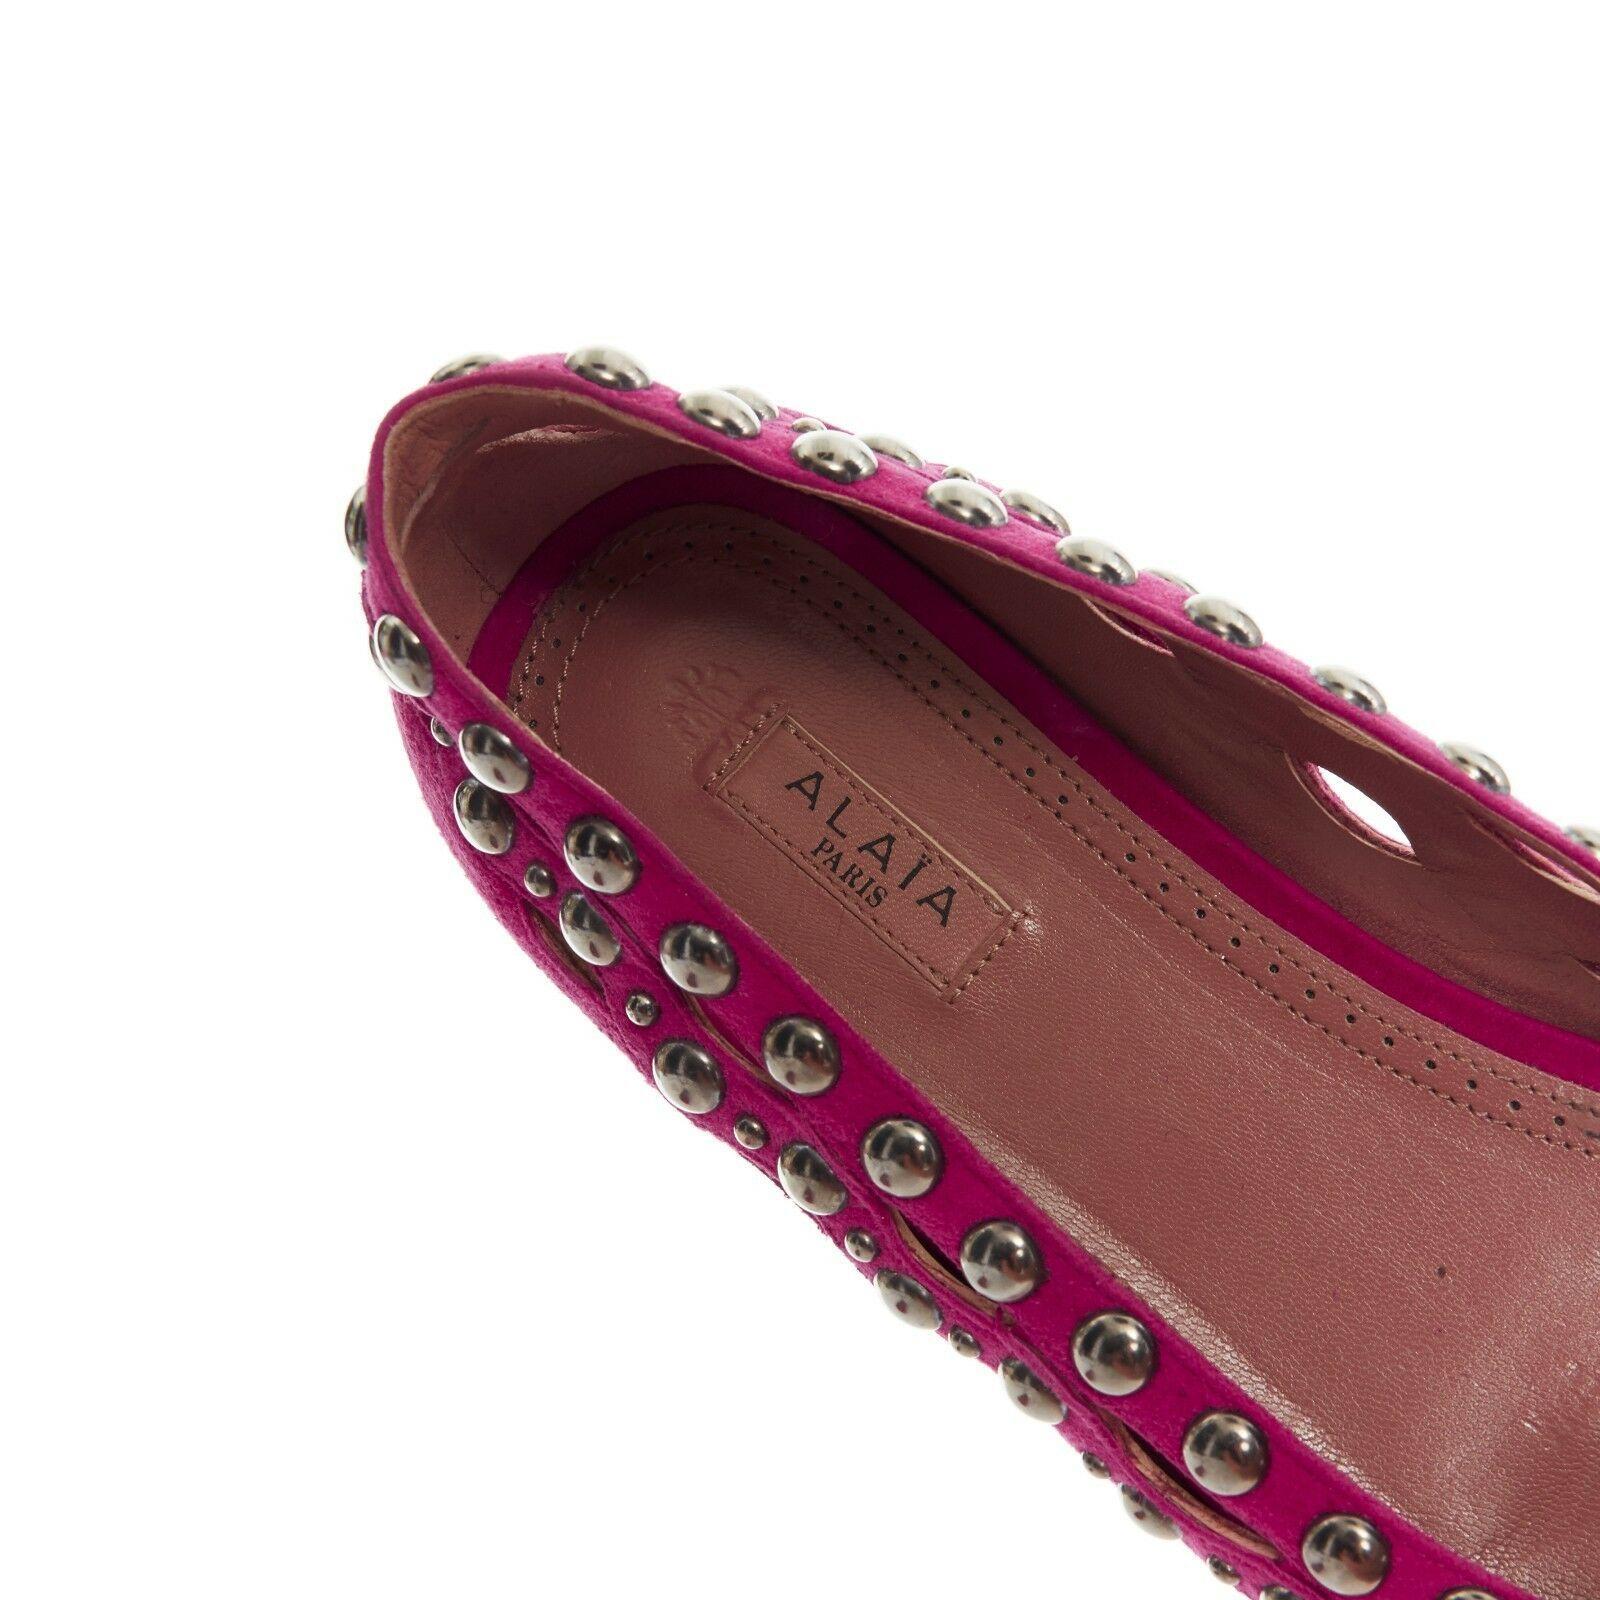 ALAIA pink suede silver studded cut out round toe ballerina flat shoes EU38 US8 2